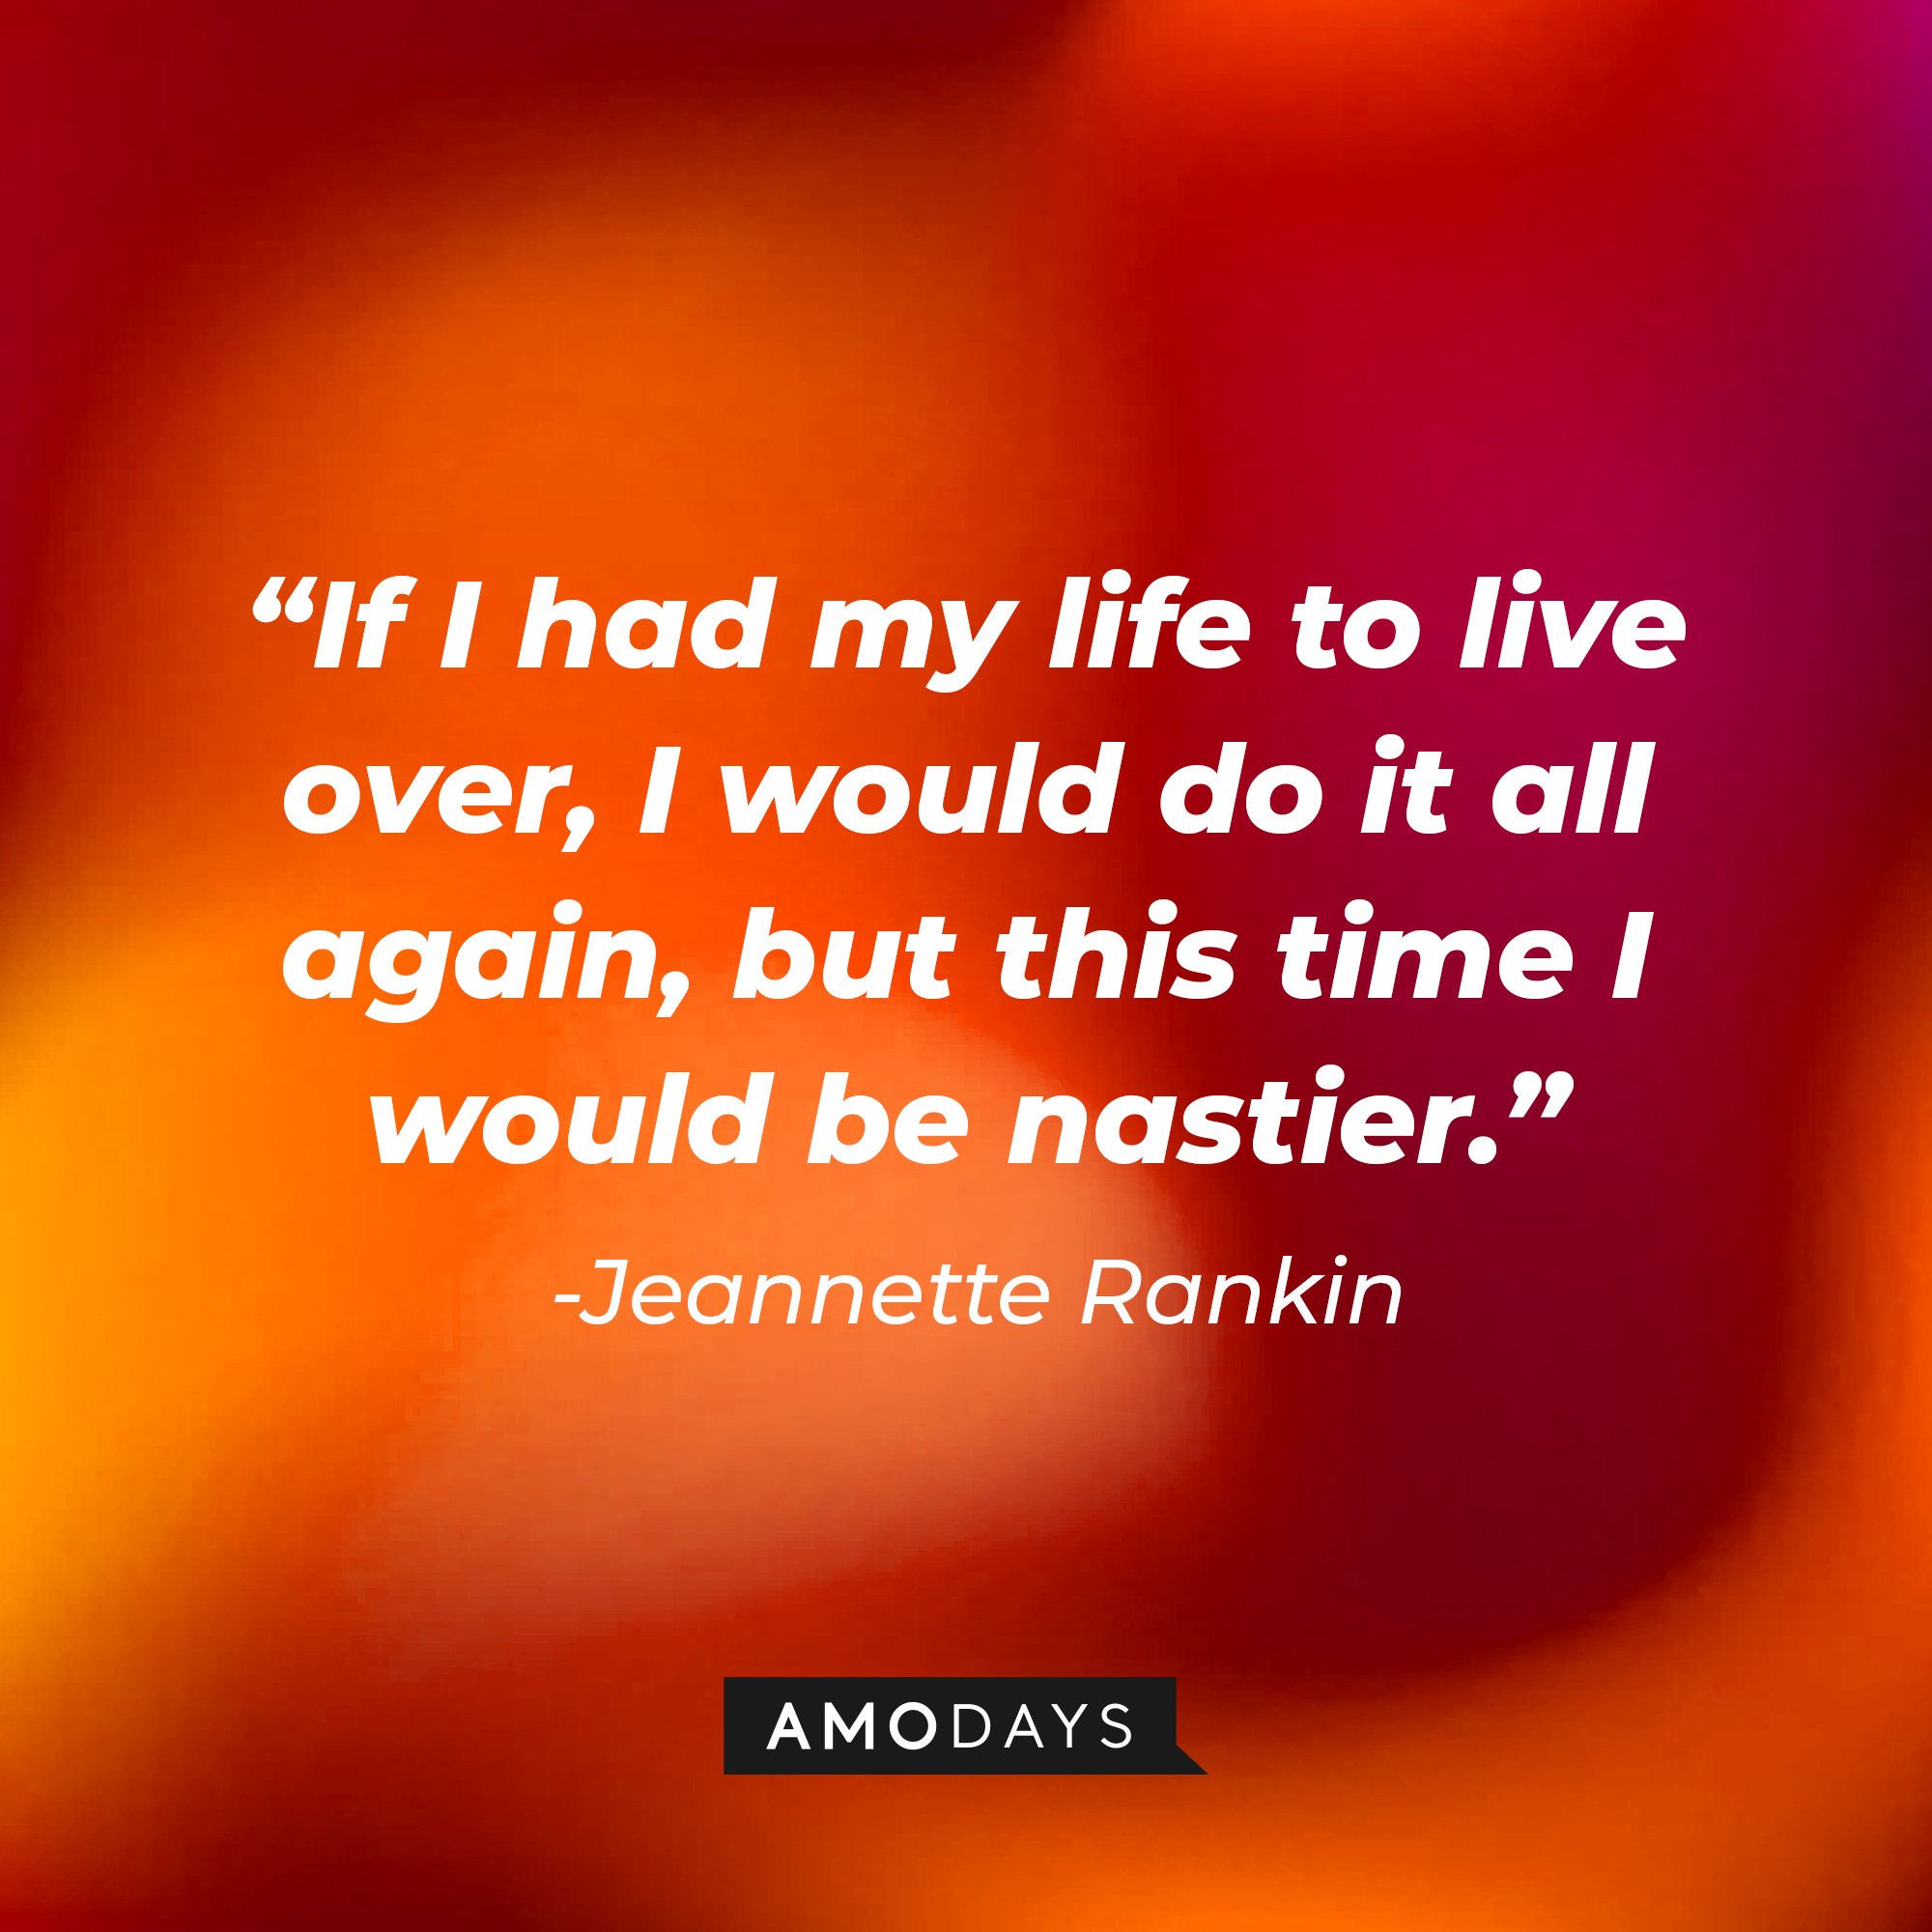 Jeannette Rankin’s quote: "If I had my life to live over, I would do it all again, but this time I would be nastier." | Image: AmoDays 